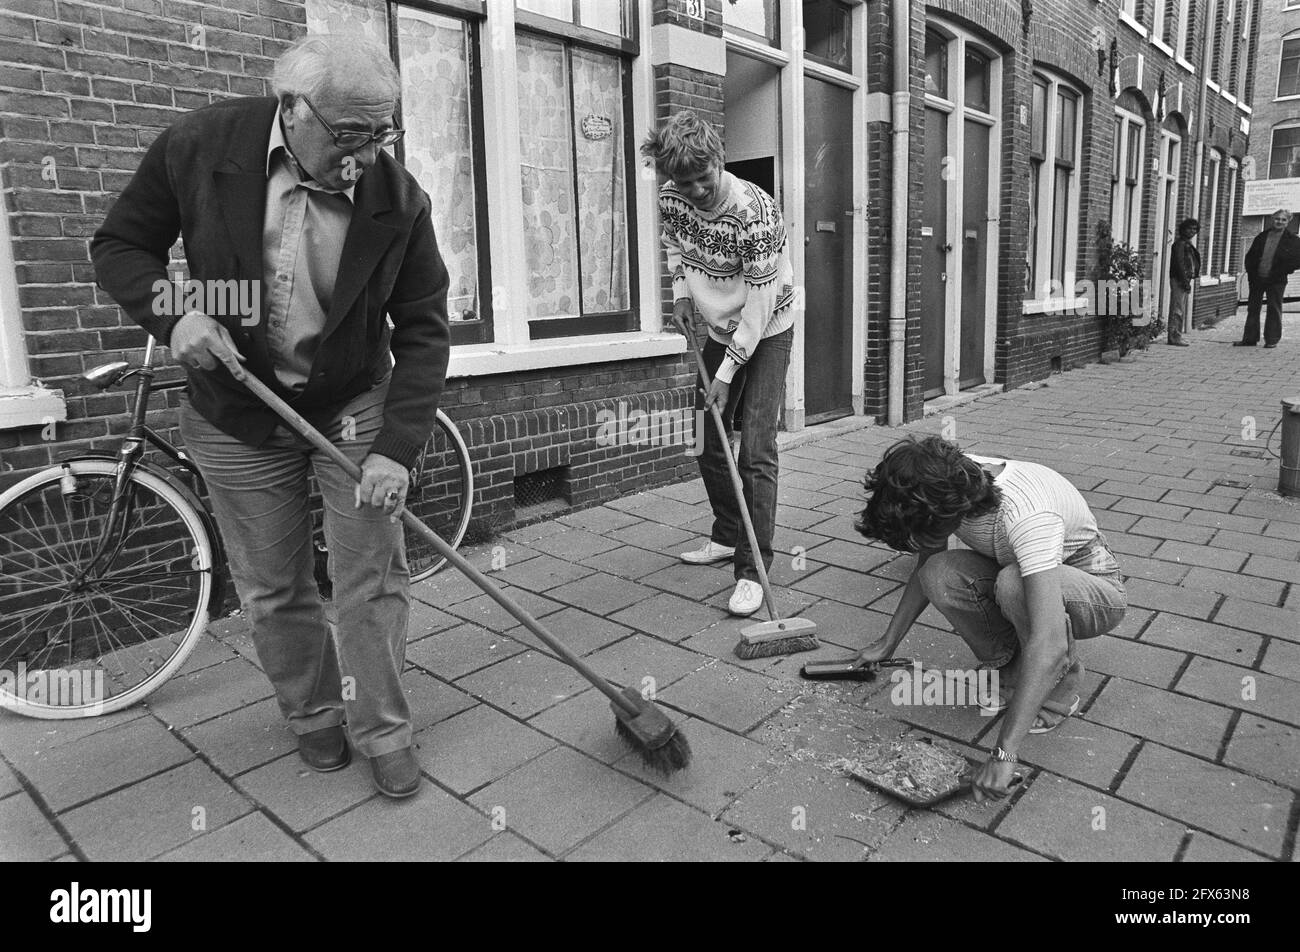 Bombing of Amsterdam Housing Bureau; residents of houses opposite clean up glass, July 5, 1982, Bombings, The Netherlands, 20th century press agency photo, news to remember, documentary, historic photography 1945-1990, visual stories, human history of the Twentieth Century, capturing moments in time Stock Photo